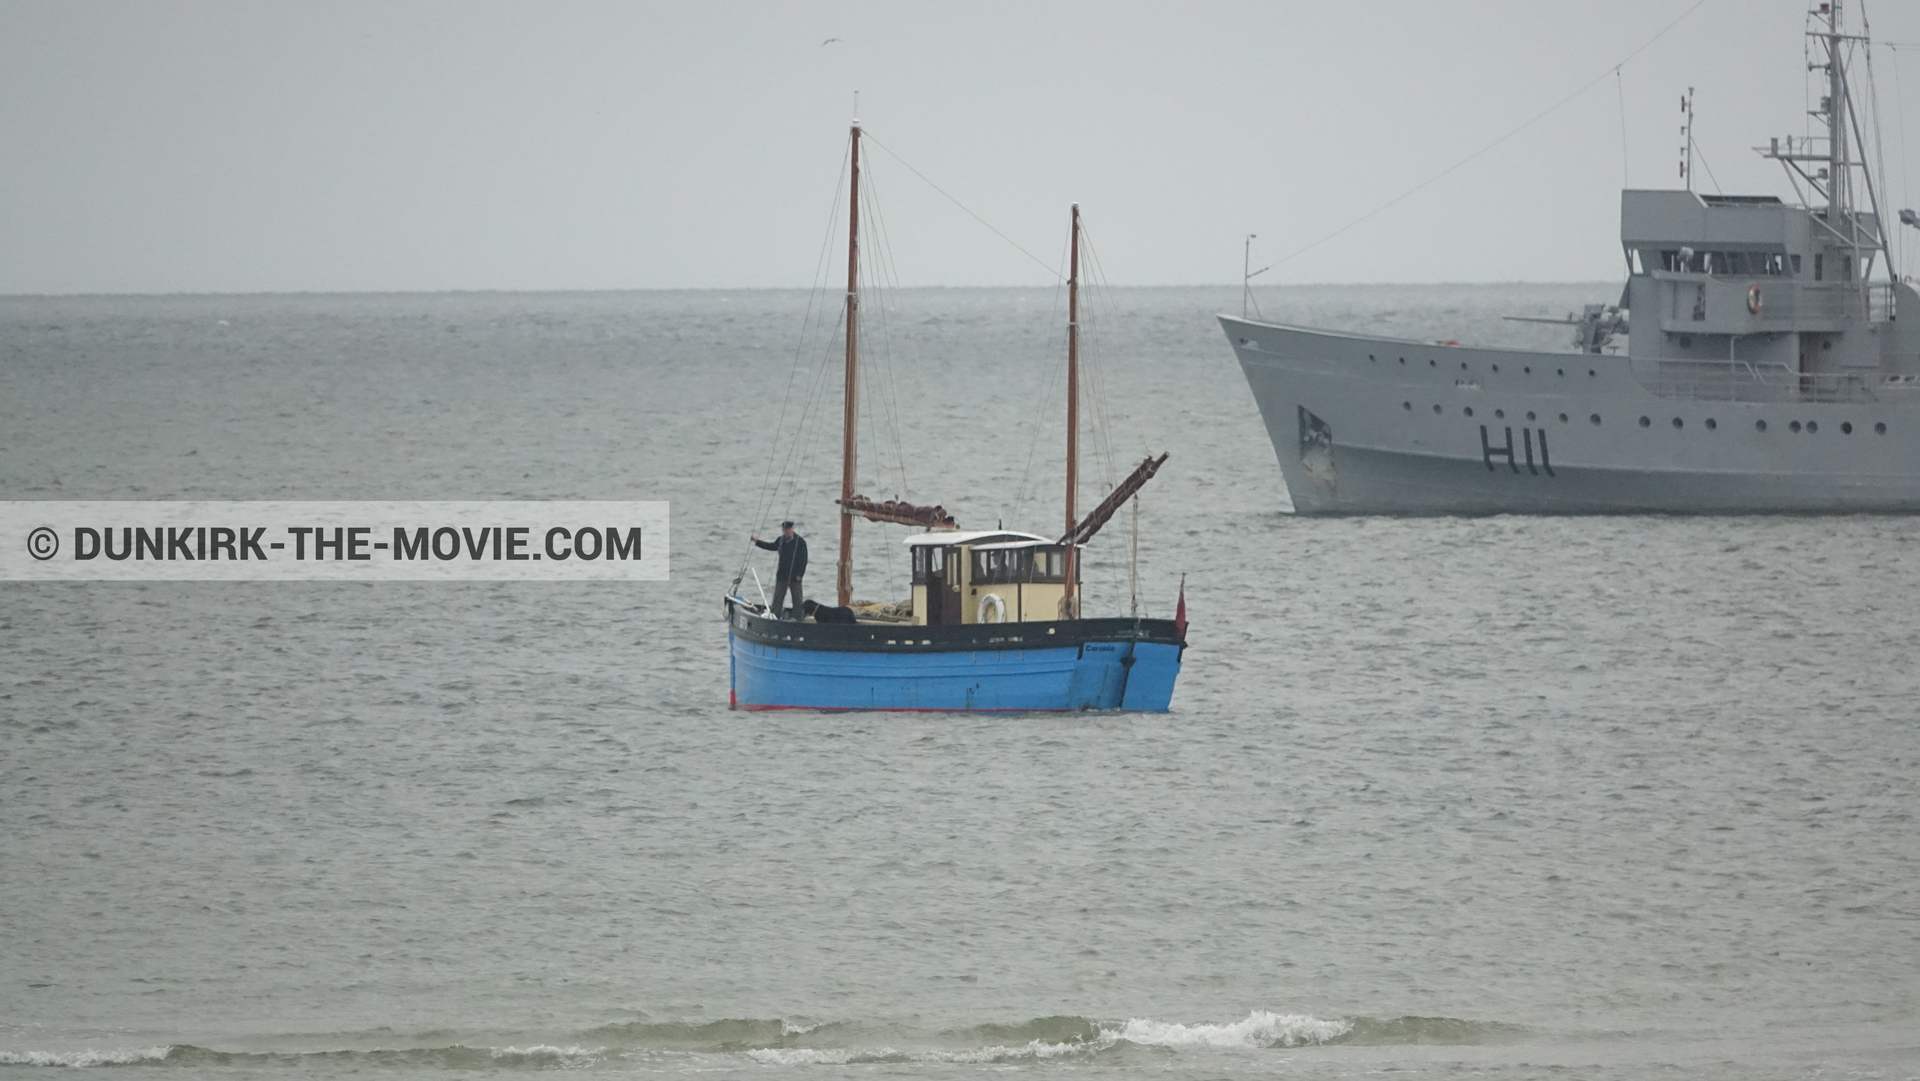 Picture with boat, H11 - MLV Castor,  from behind the scene of the Dunkirk movie by Nolan